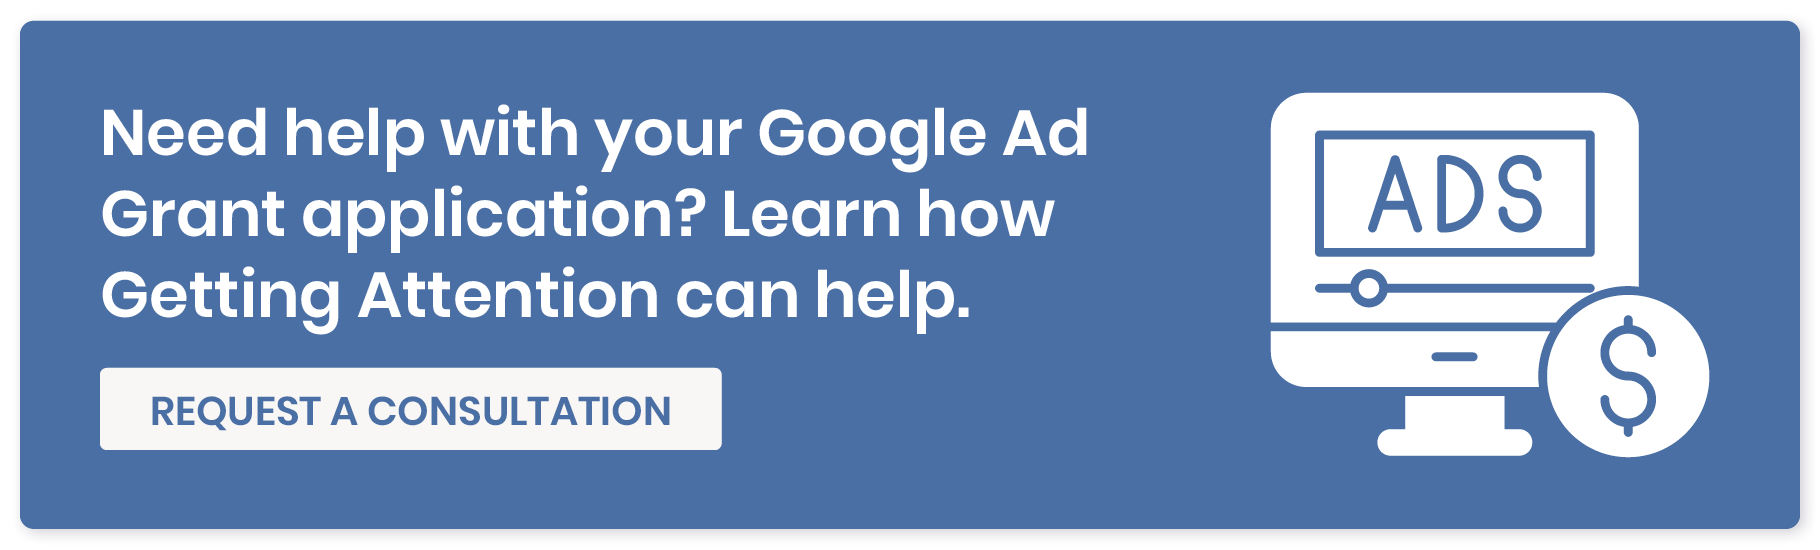 Need help with your Google Ad Grant application? Learn how Getting Attention can help. Request a consultation. 